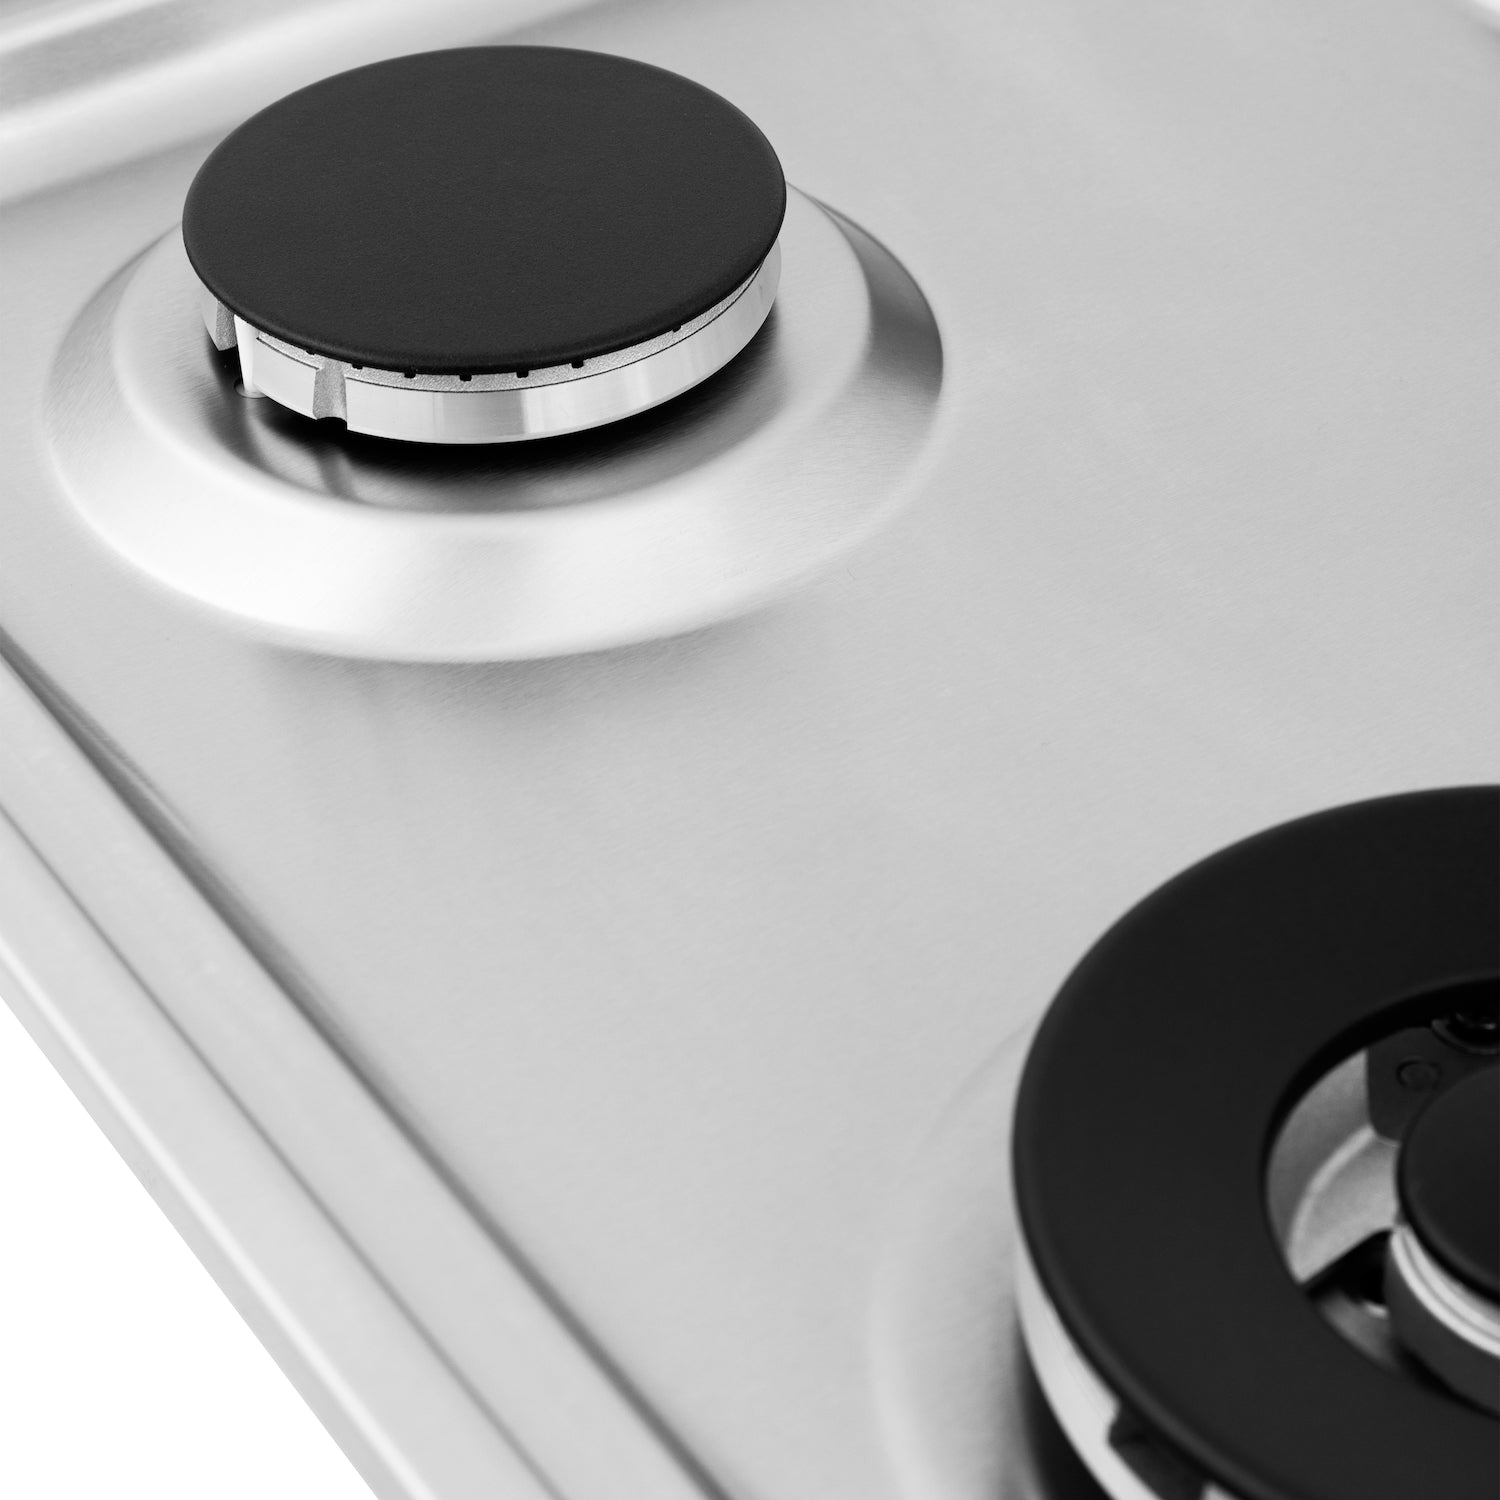 Sealed Italian-made burners on ZLINE 30 in. Gas Cooktop (RC30)